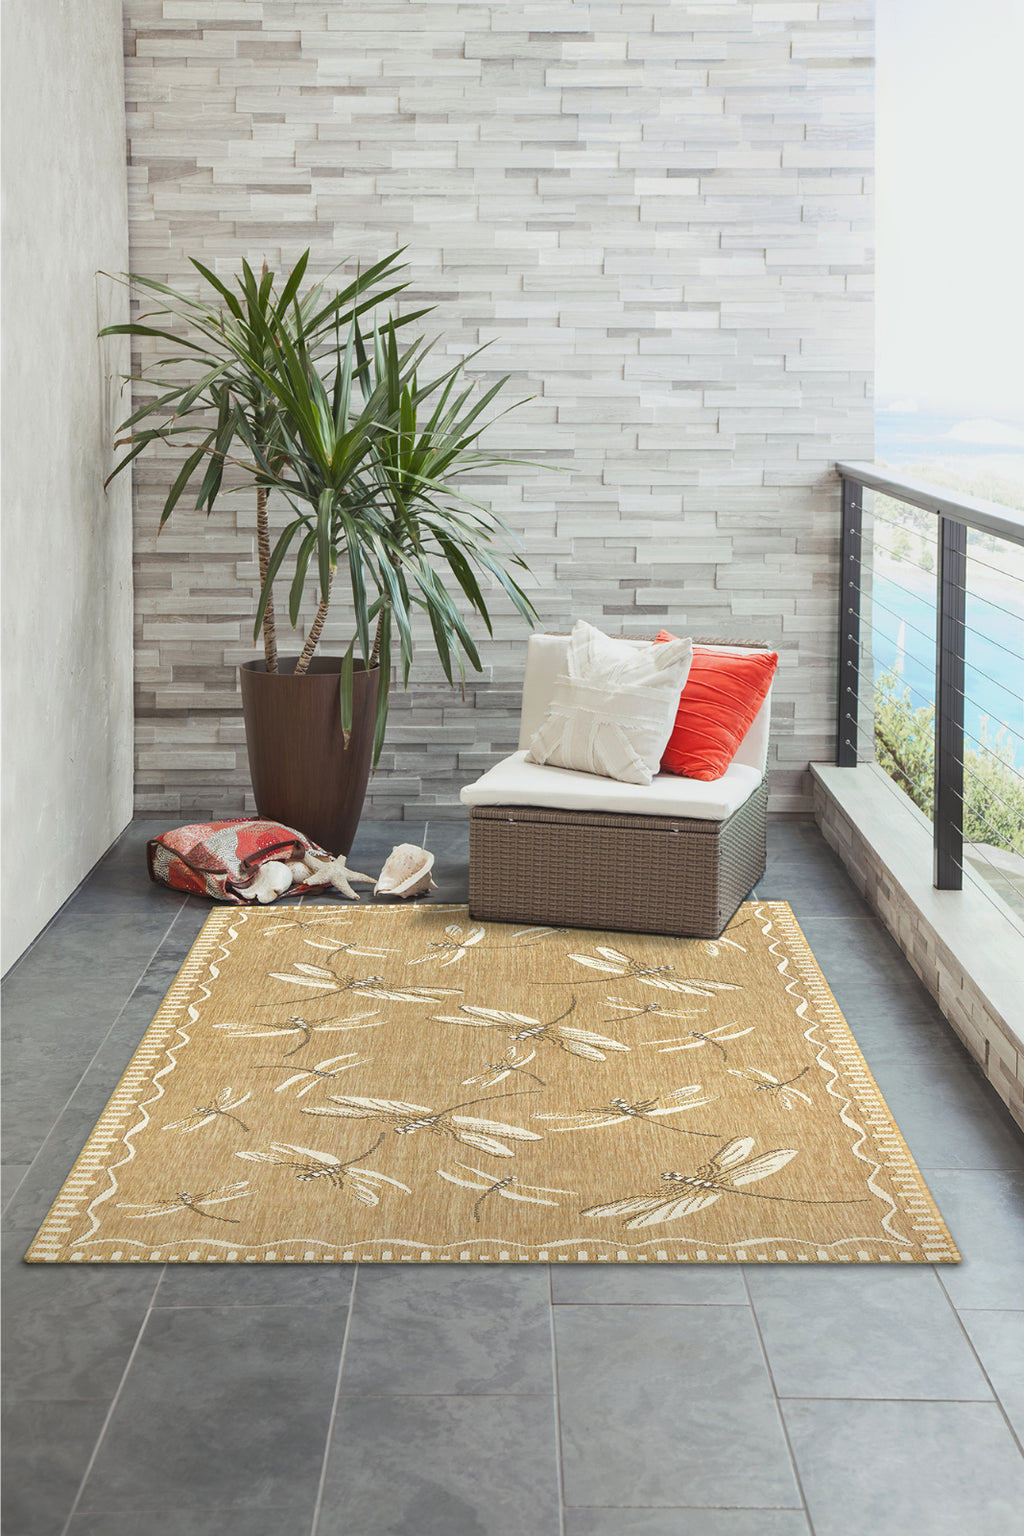 Trans Ocean Carmel 8440/22 Dragonfly Beige Area Rug by Liora Manne Room Scene Image Feature